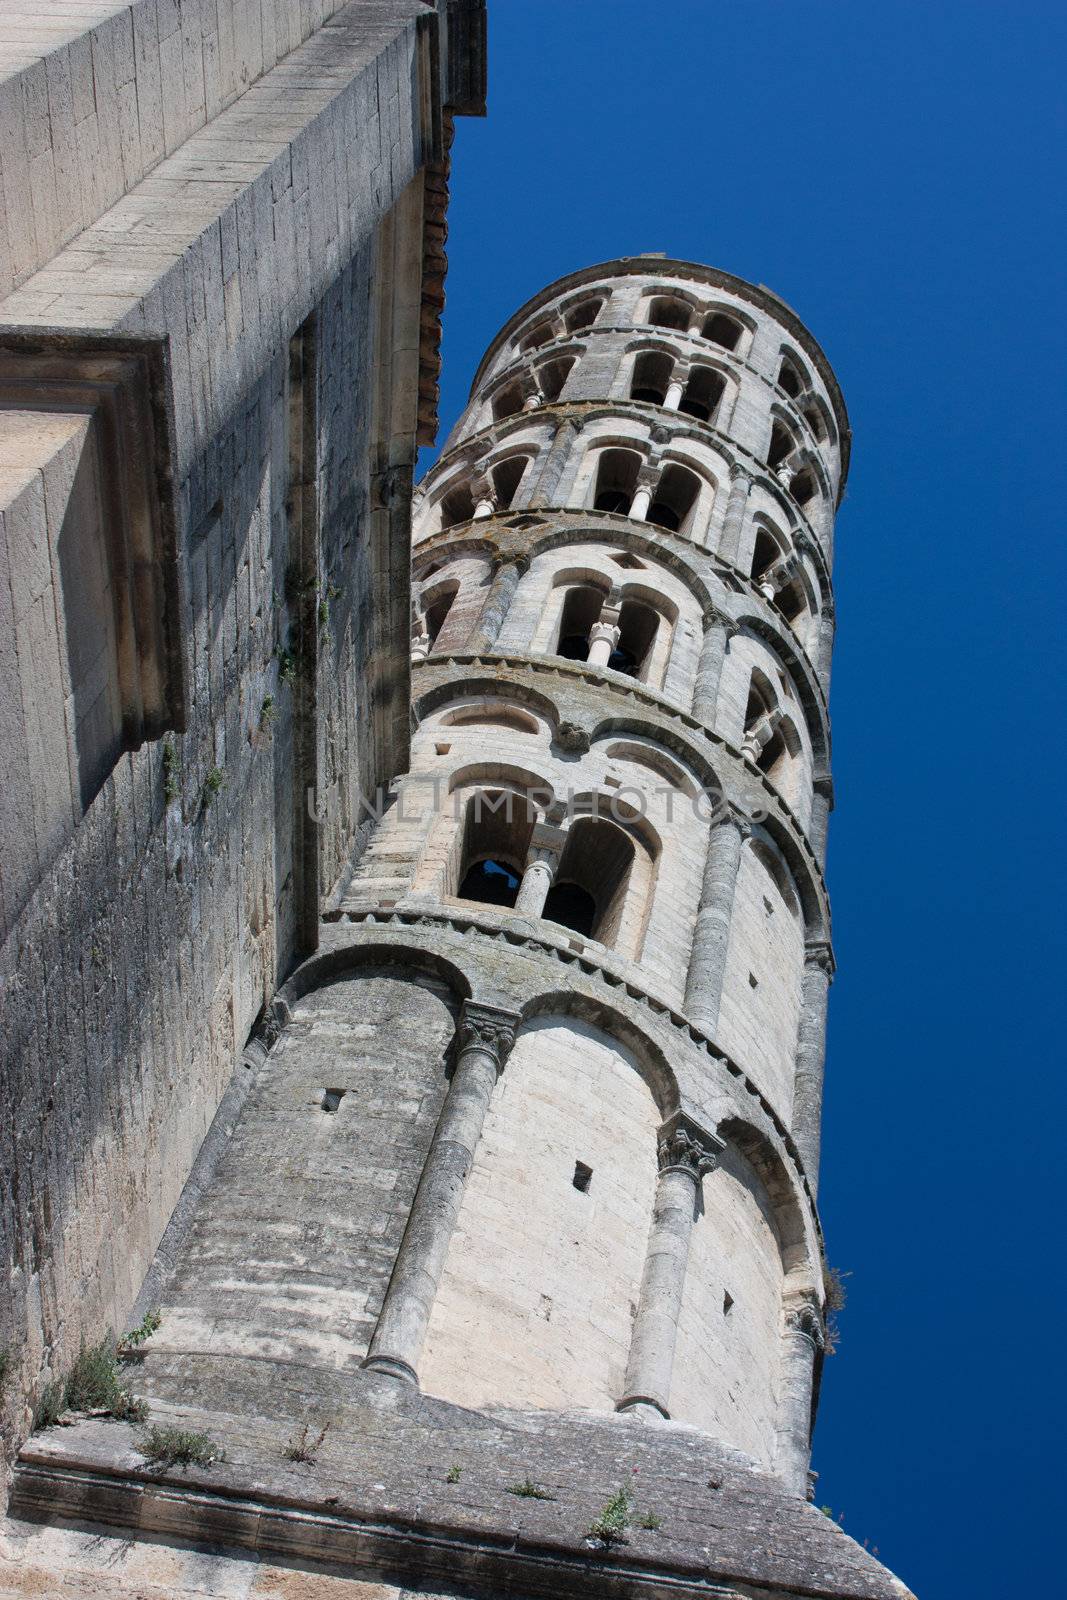 Fenestrelle Tower, Cathedral of St. Theodore in Uzes by TristanBM